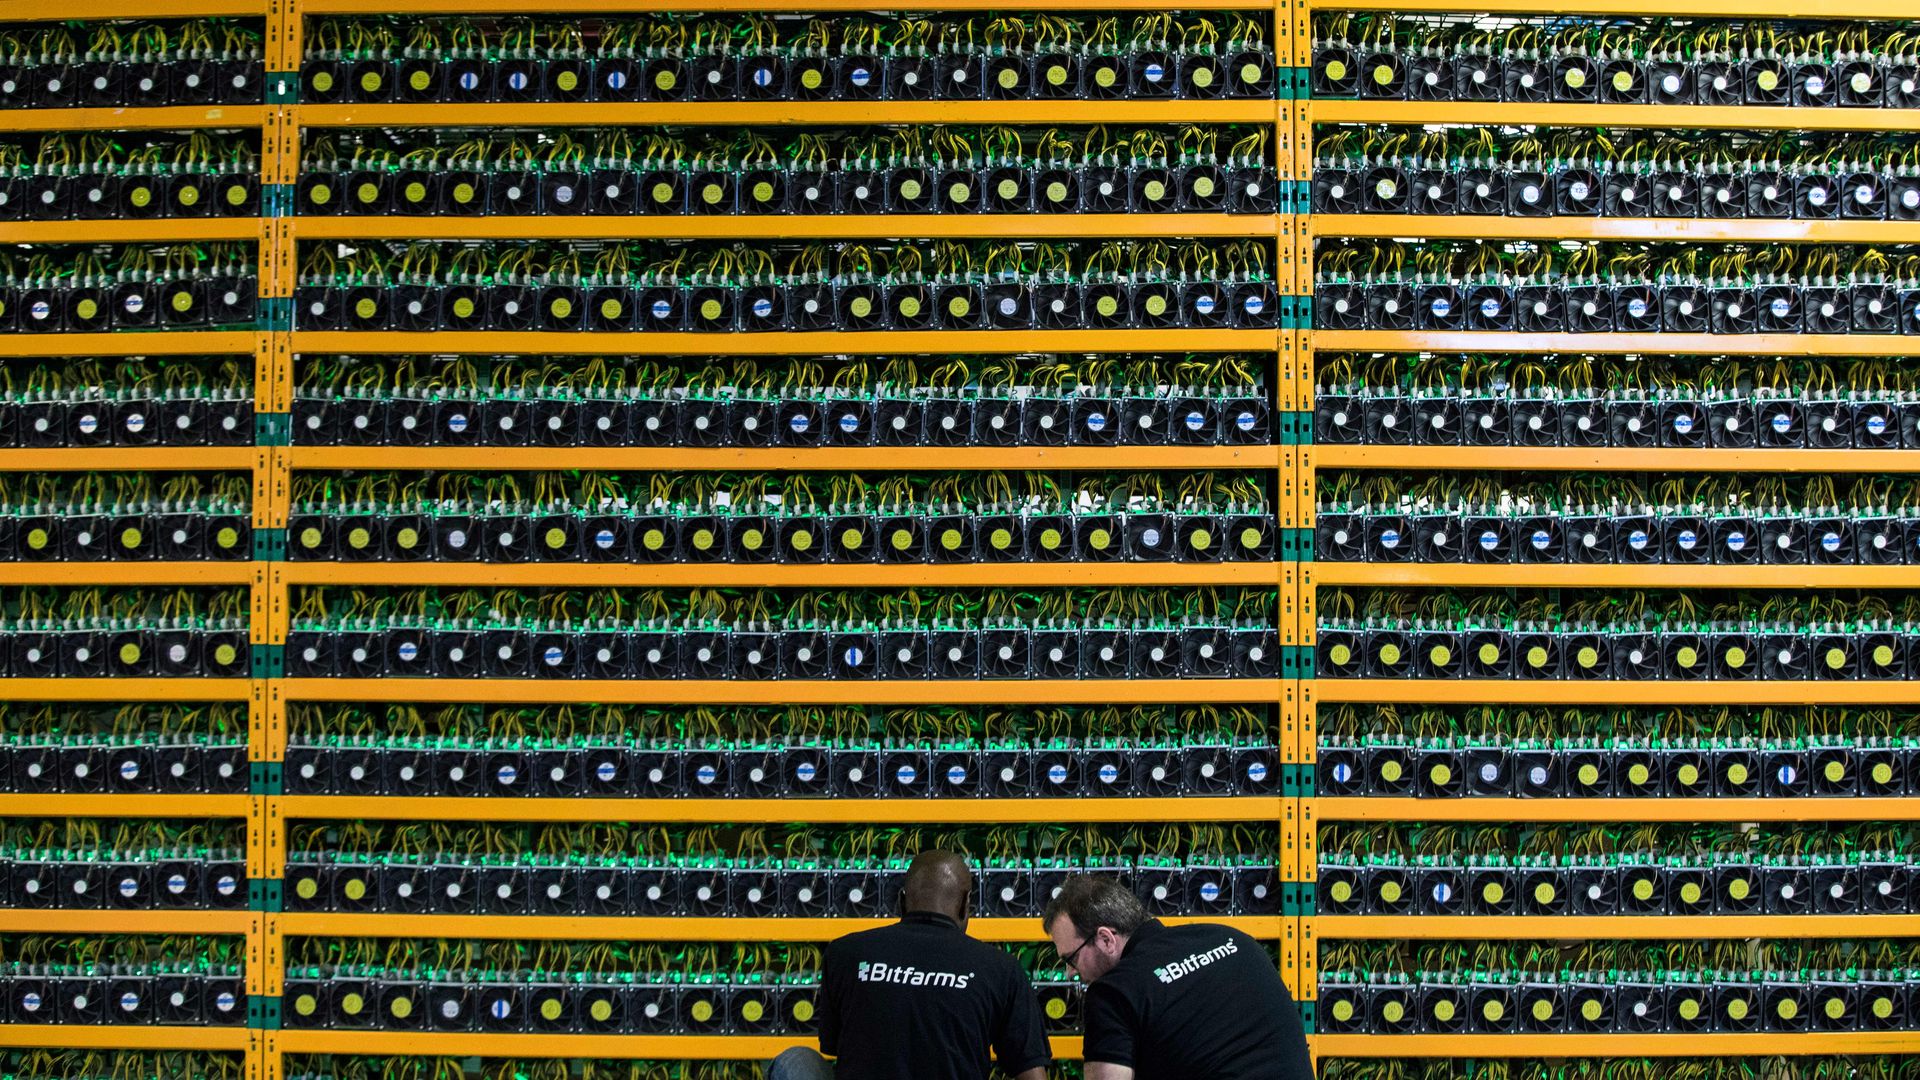 workers and servers at a bitcoin mining facility